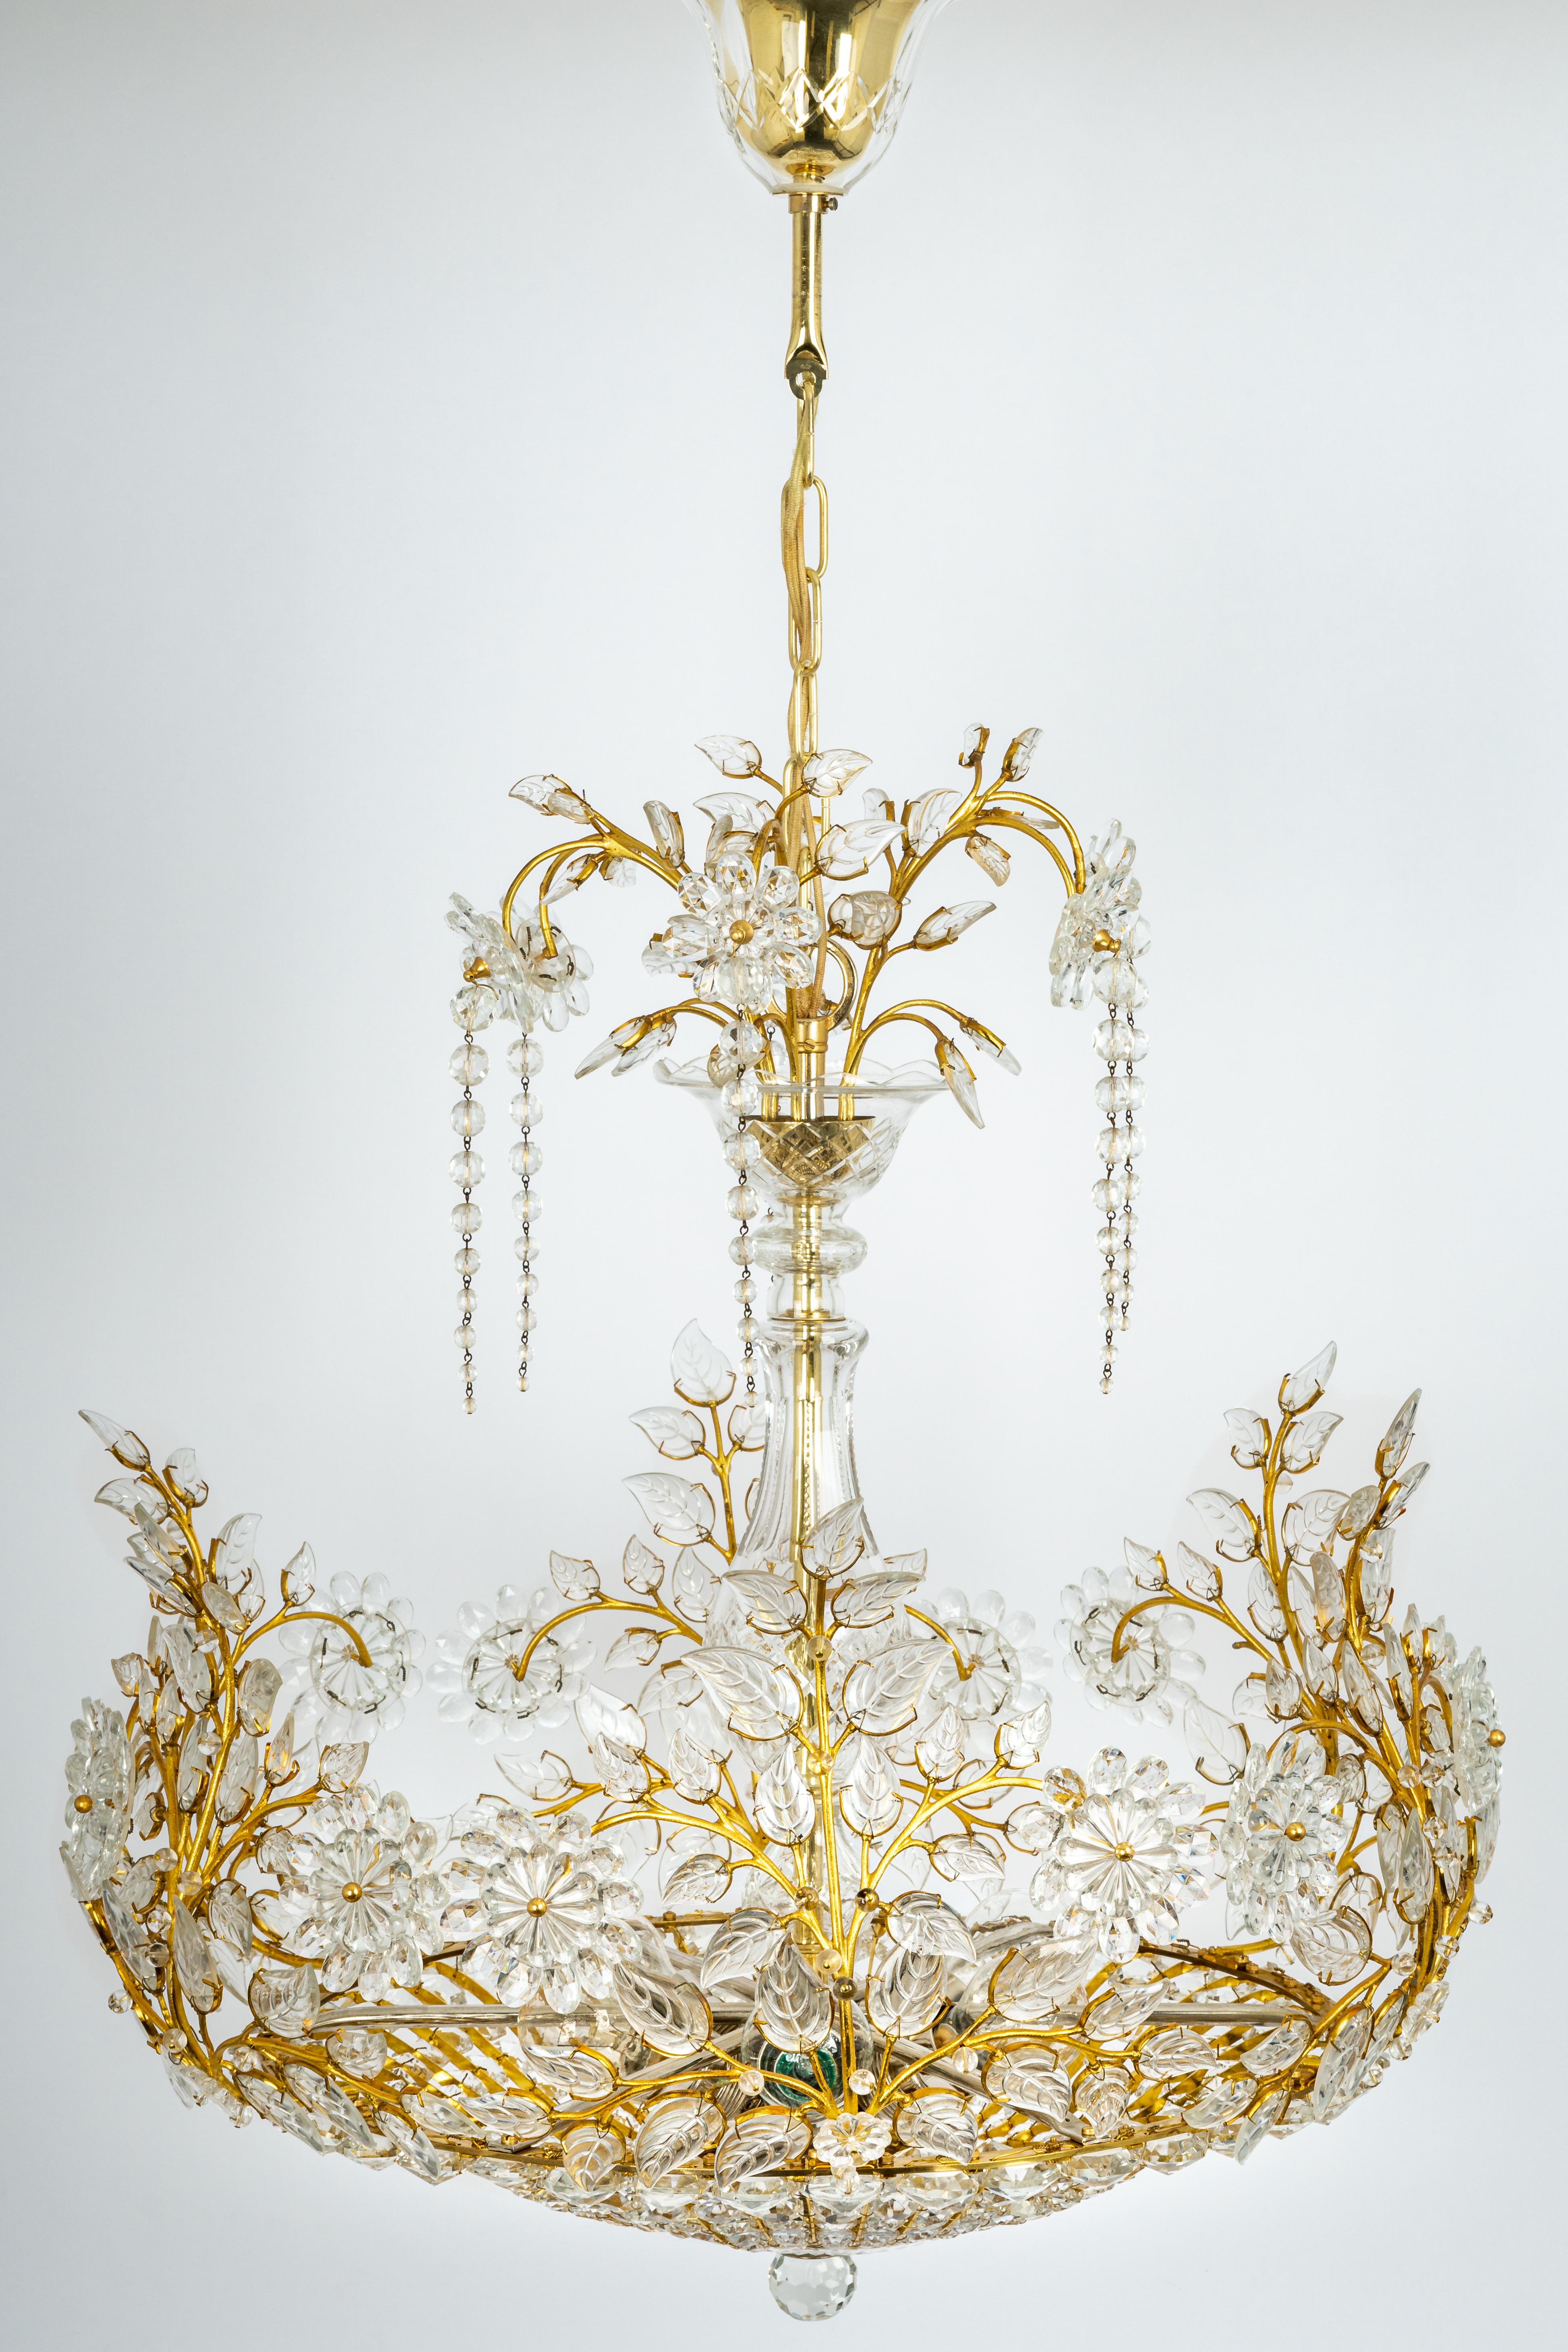 A wonderful and high-quality brass chandelier by Palwa, Germany, 1970s.
It is made of a brass frame and many crystals. Great scale and exquisite detail.2 small glasses are missing.

The lamp takes 6 x E27 (standard Bulbs up to 60 Watts